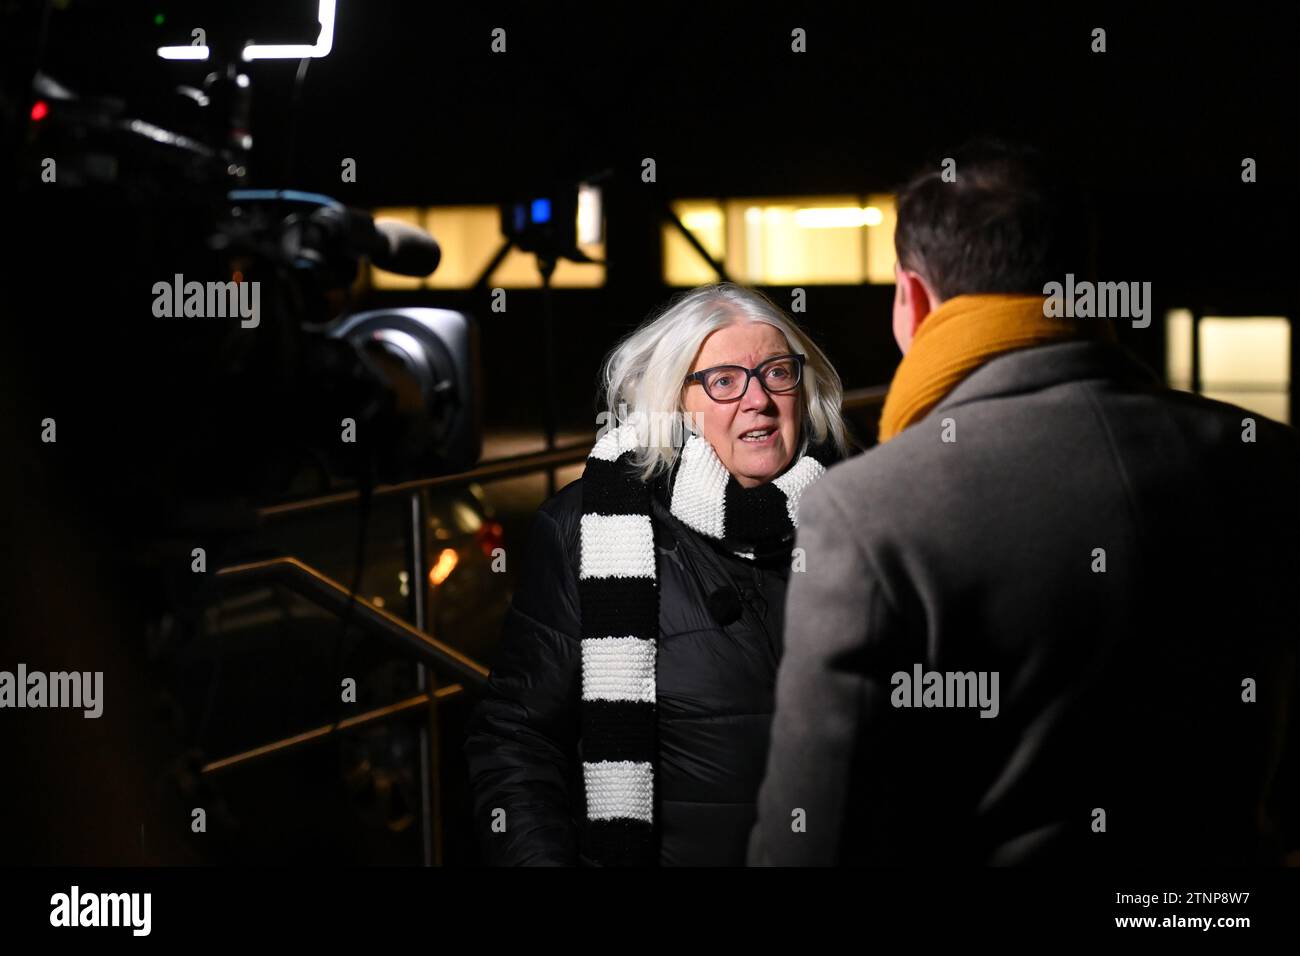 Burslem, UK, 19th December 2023. Port Vale owner Carol Shanahan is pictured being interviewed by a Television Channel ahead of the team's Carabao Cup Quarter Final tie at home to Middlesbrough. Credit: TeeGeePix/Alamy Live News Stock Photo